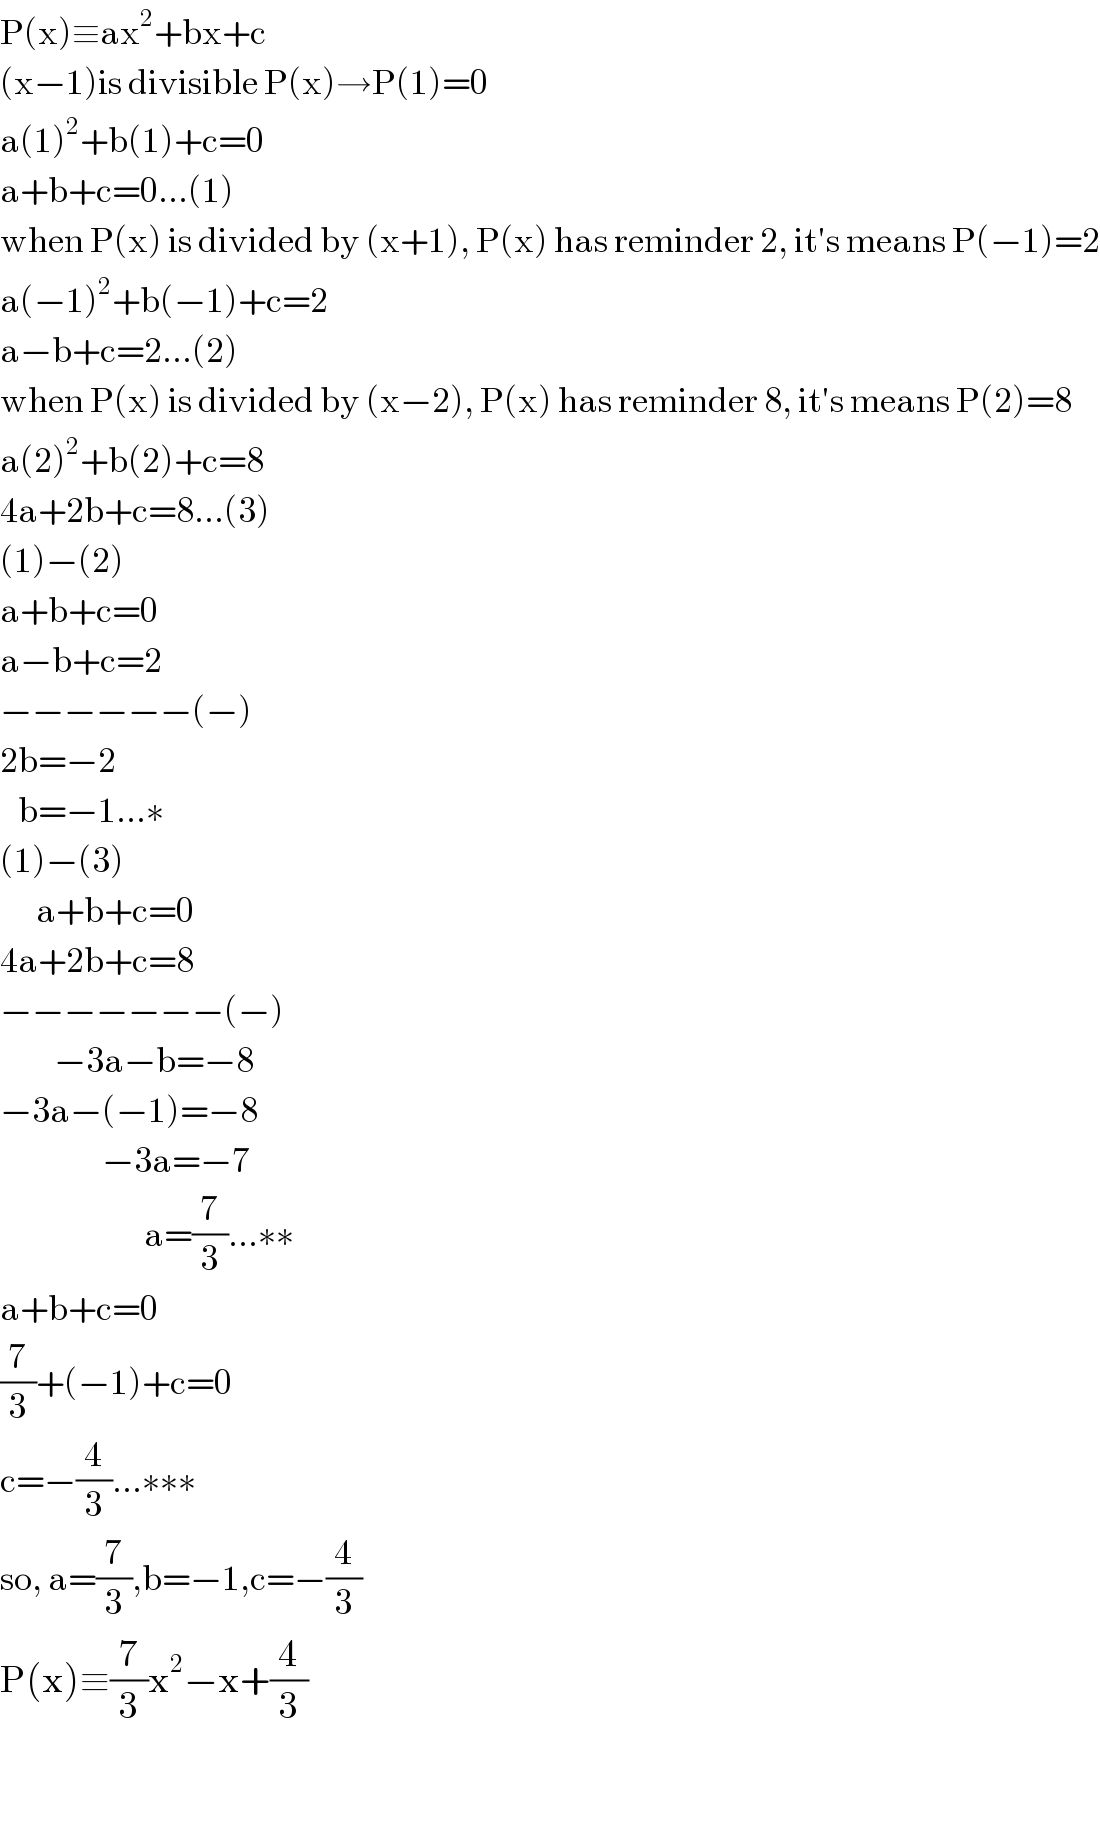 P(x)≡ax^2 +bx+c  (x−1)is divisible P(x)→P(1)=0  a(1)^2 +b(1)+c=0  a+b+c=0...(1)  when P(x) is divided by (x+1), P(x) has reminder 2, it′s means P(−1)=2  a(−1)^2 +b(−1)+c=2  a−b+c=2...(2)  when P(x) is divided by (x−2), P(x) has reminder 8, it′s means P(2)=8  a(2)^2 +b(2)+c=8  4a+2b+c=8...(3)  (1)−(2)  a+b+c=0  a−b+c=2  −−−−−−(−)  2b=−2     b=−1...∗  (1)−(3)        a+b+c=0  4a+2b+c=8  −−−−−−−(−)           −3a−b=−8  −3a−(−1)=−8                   −3a=−7                          a=(7/3)...∗∗  a+b+c=0  (7/3)+(−1)+c=0  c=−(4/3)...∗∗∗  so, a=(7/3),b=−1,c=−(4/3)  P(x)≡(7/3)x^2 −x+(4/3)    